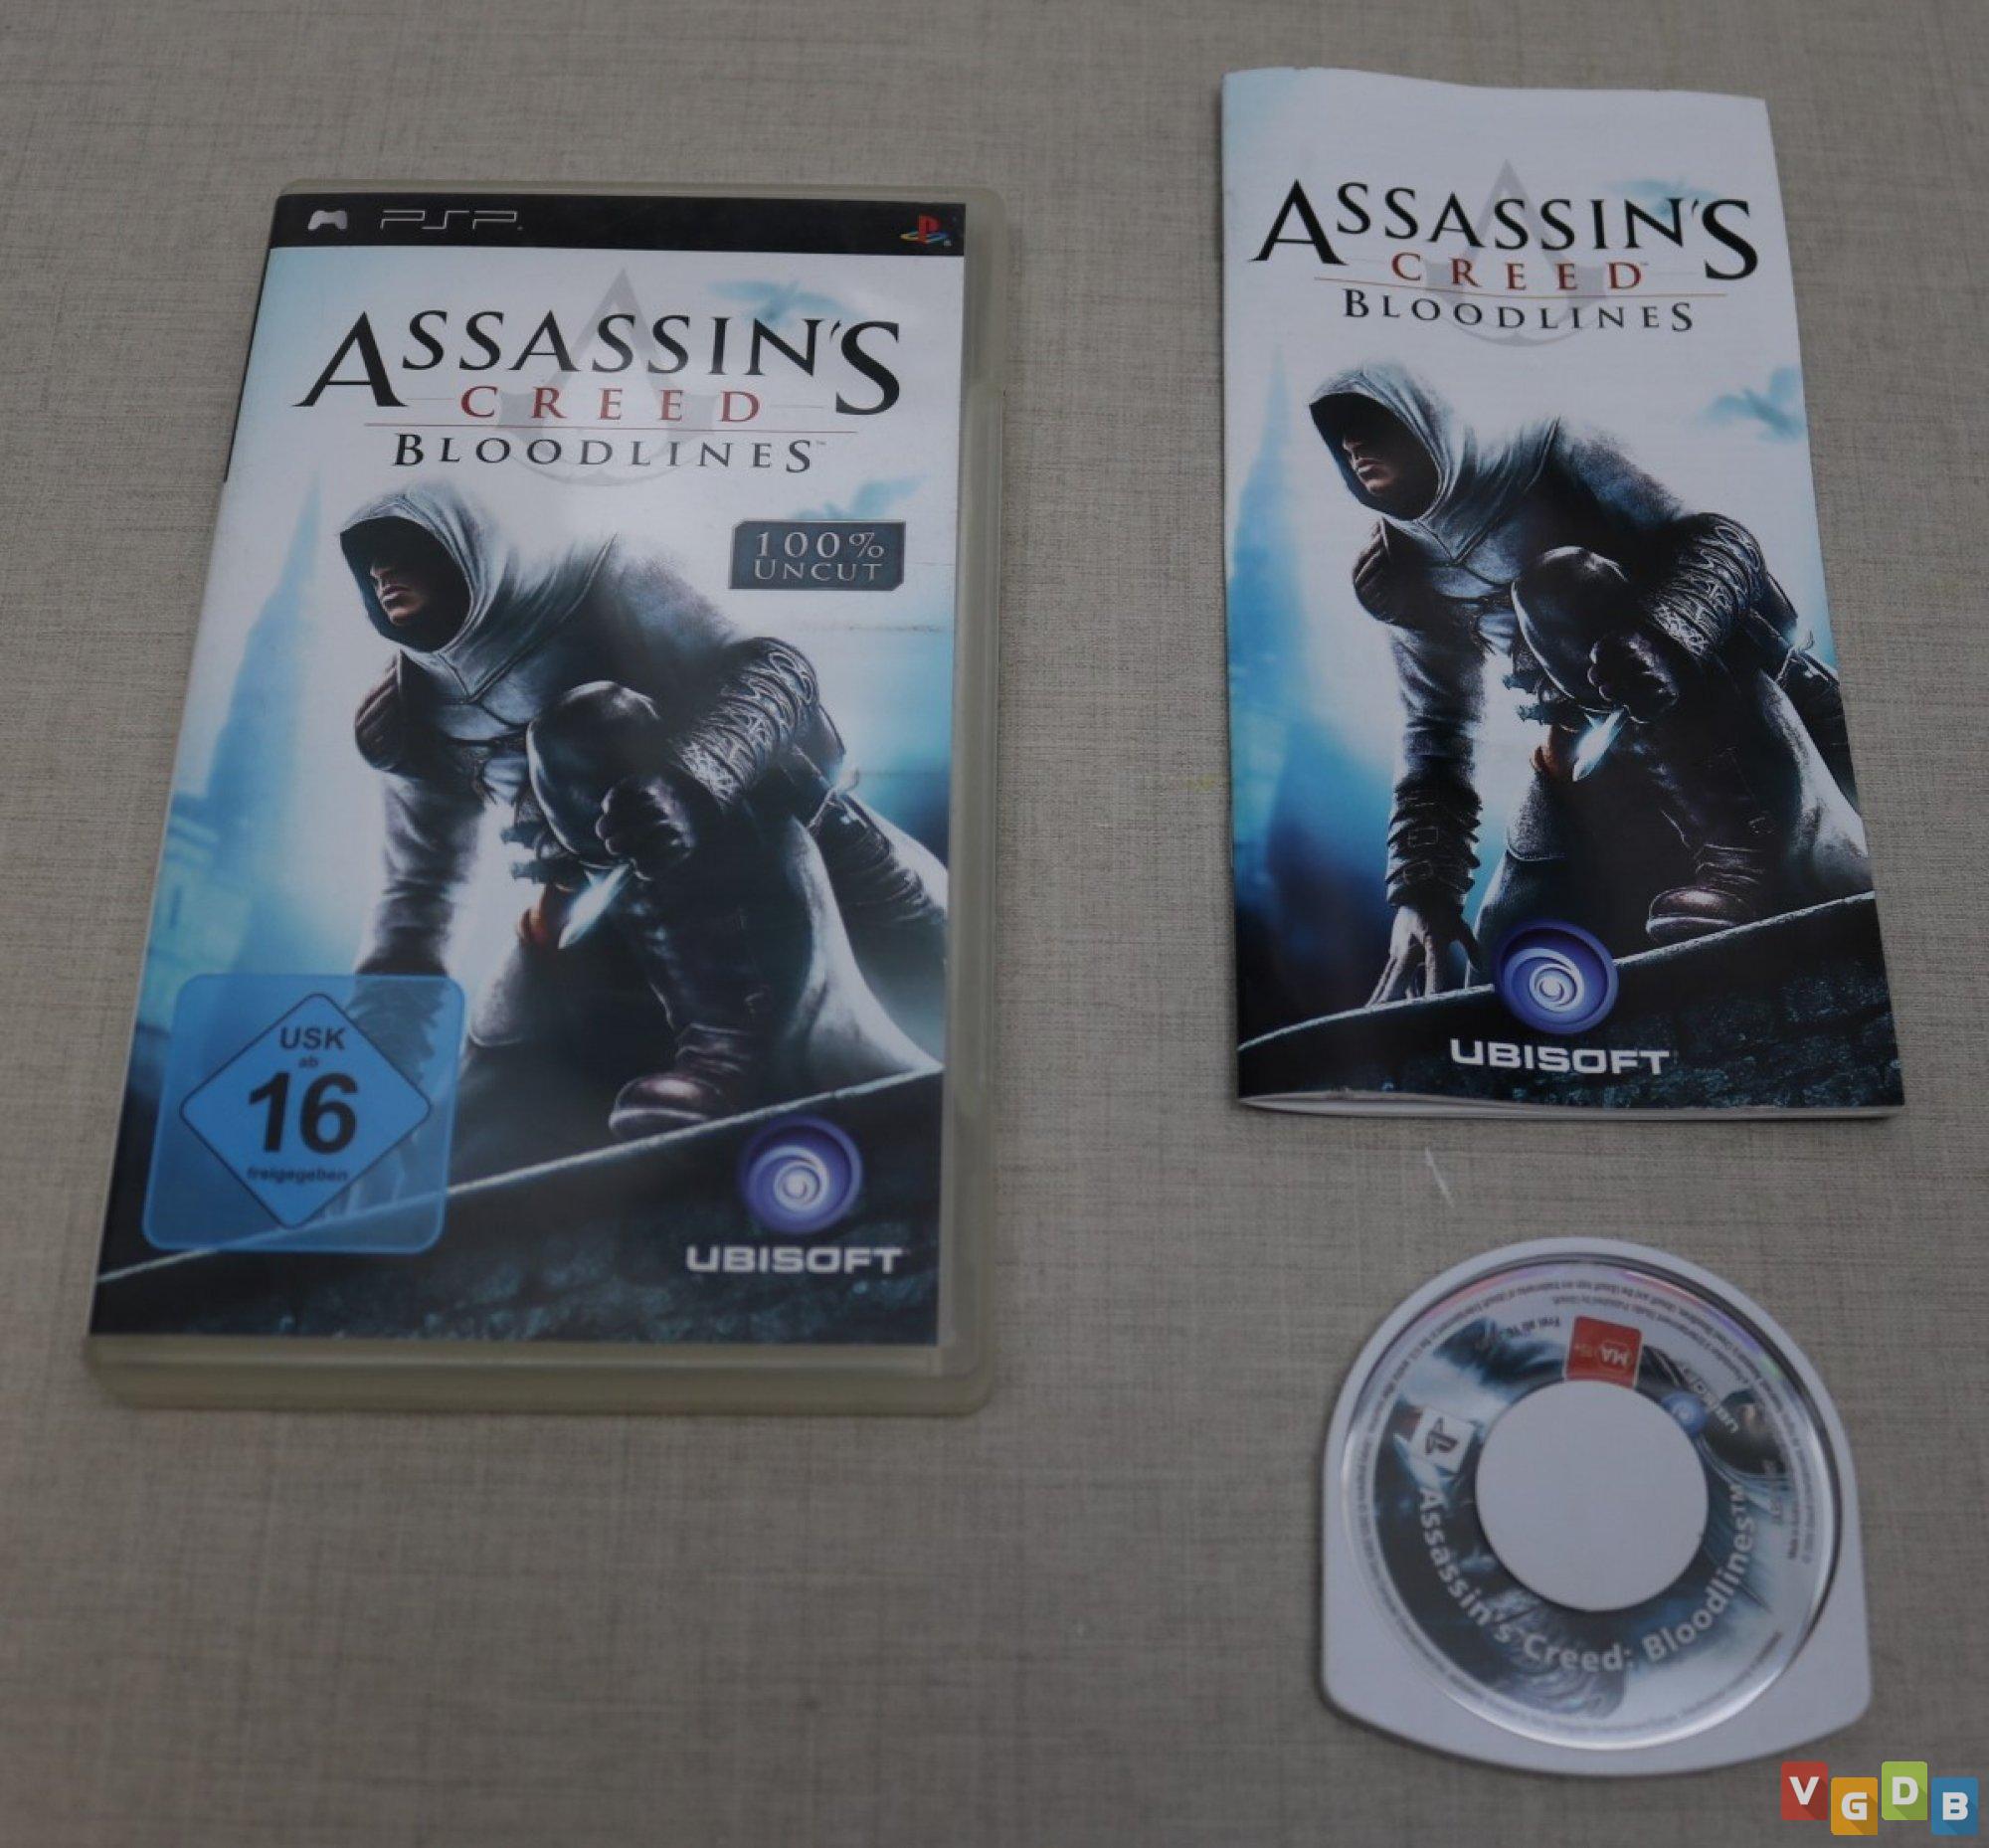 TGDB - Browse - Game - Assassin's Creed: Bloodlines